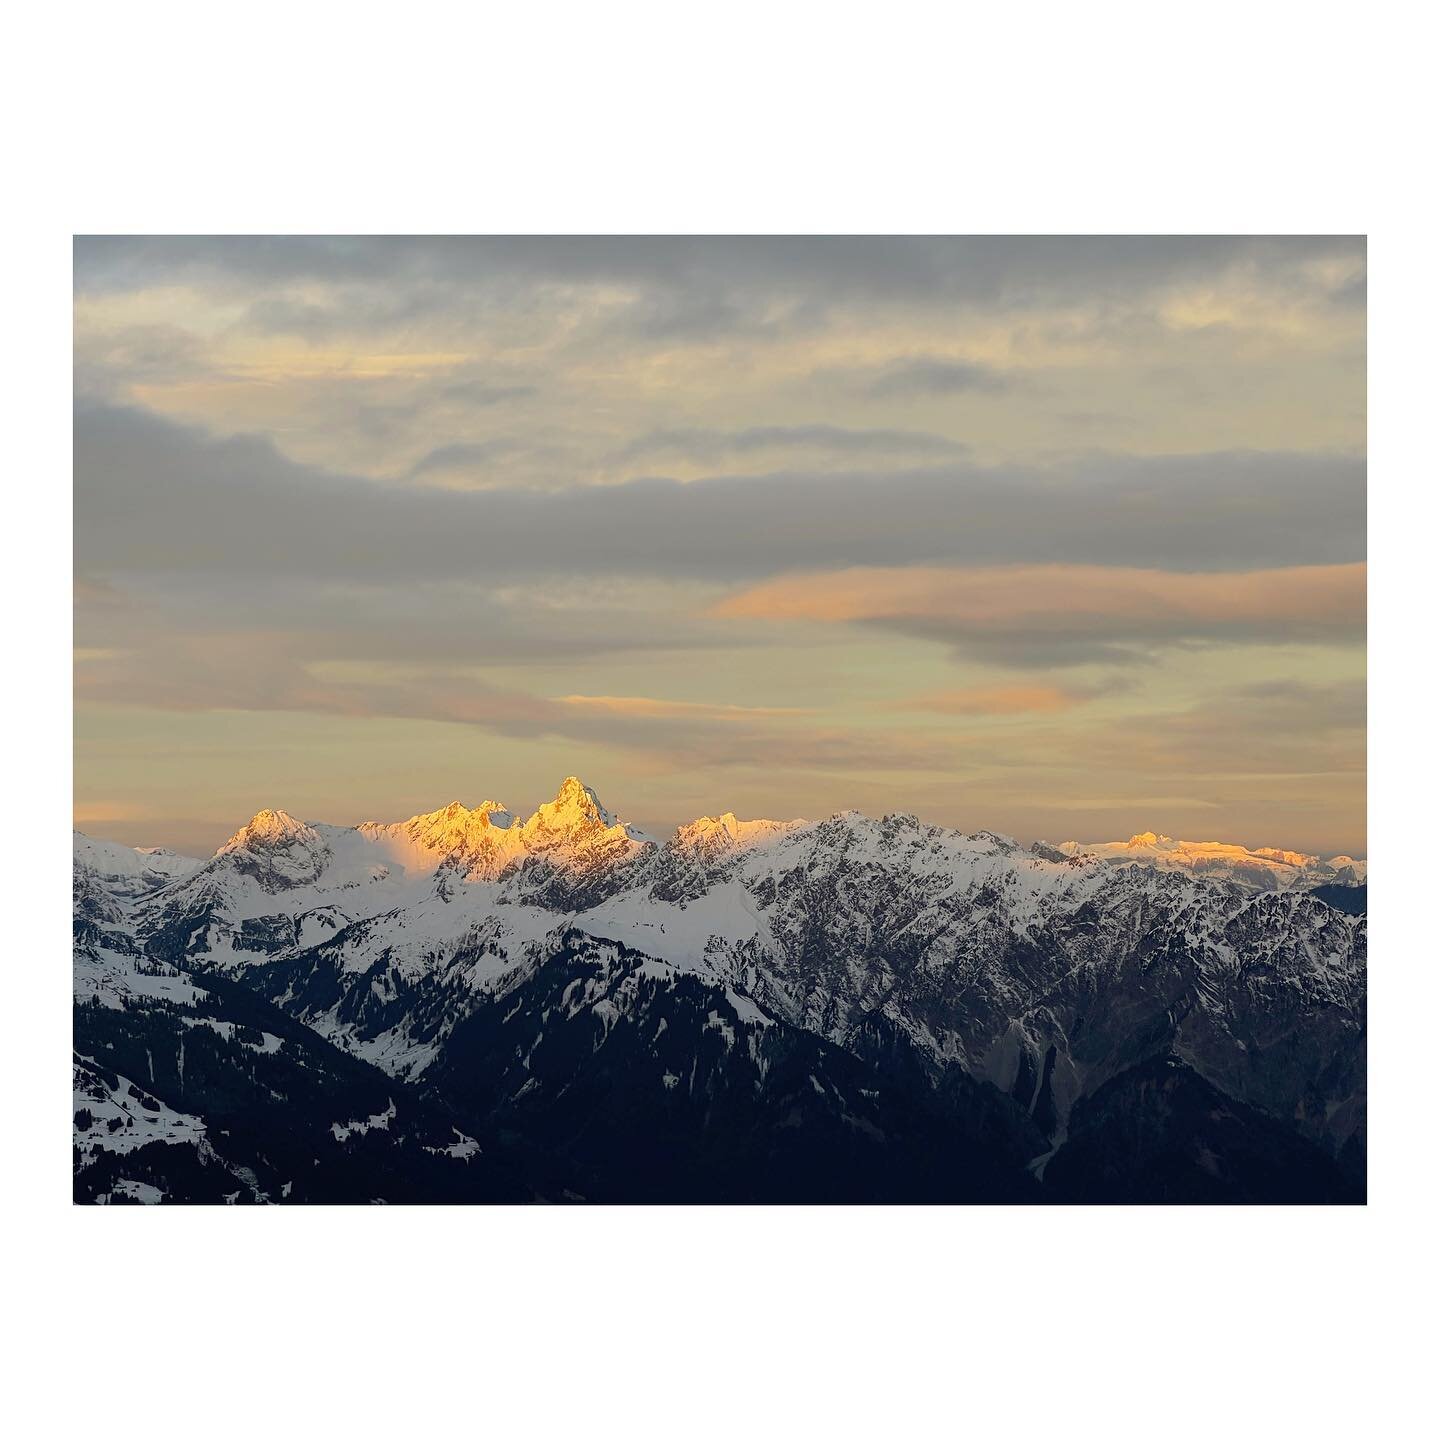 So happy to be back in this very special place in the Austrian Alps. Beautiful and familiar 🤍
.
.
.
#hochjoch #wormserh&uuml;tte #montafon #schruns #alpenlichter #mountainscape #wintersunset